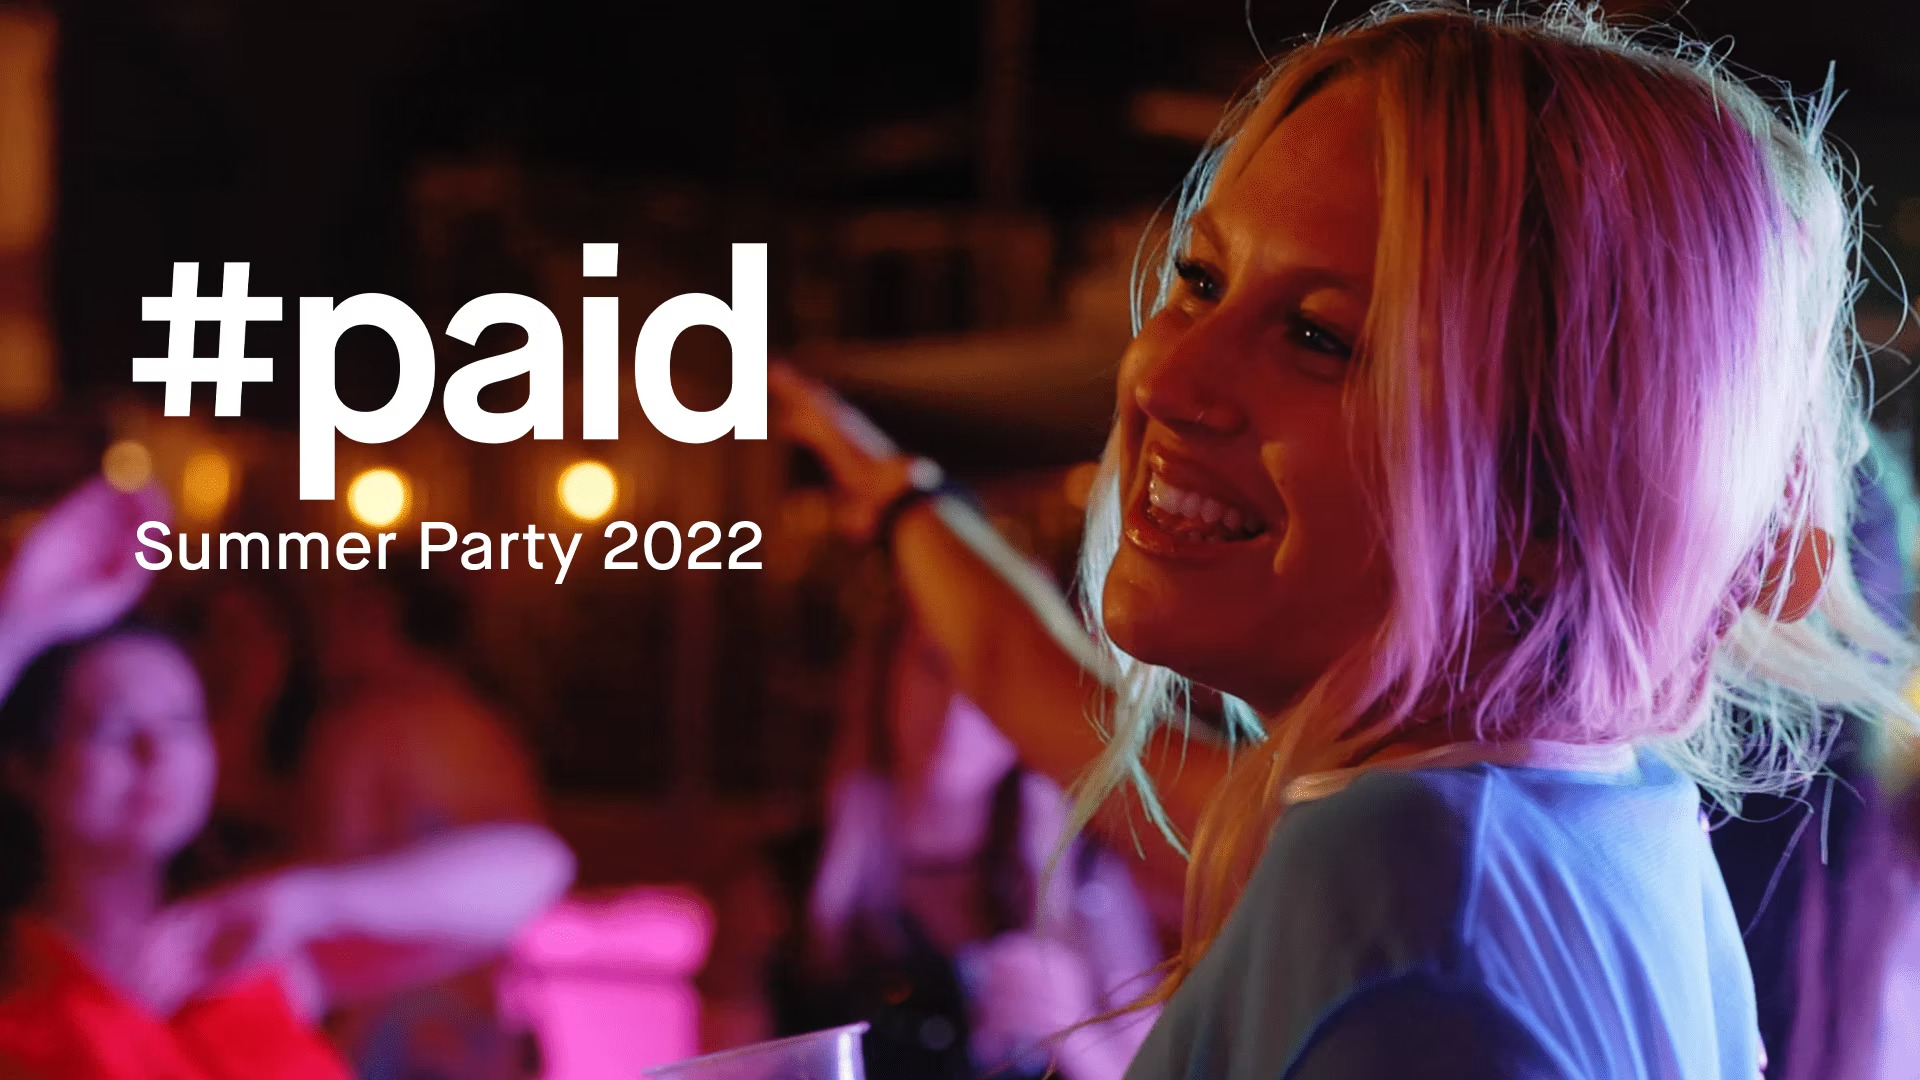 #paid / “Summer Party 2022”